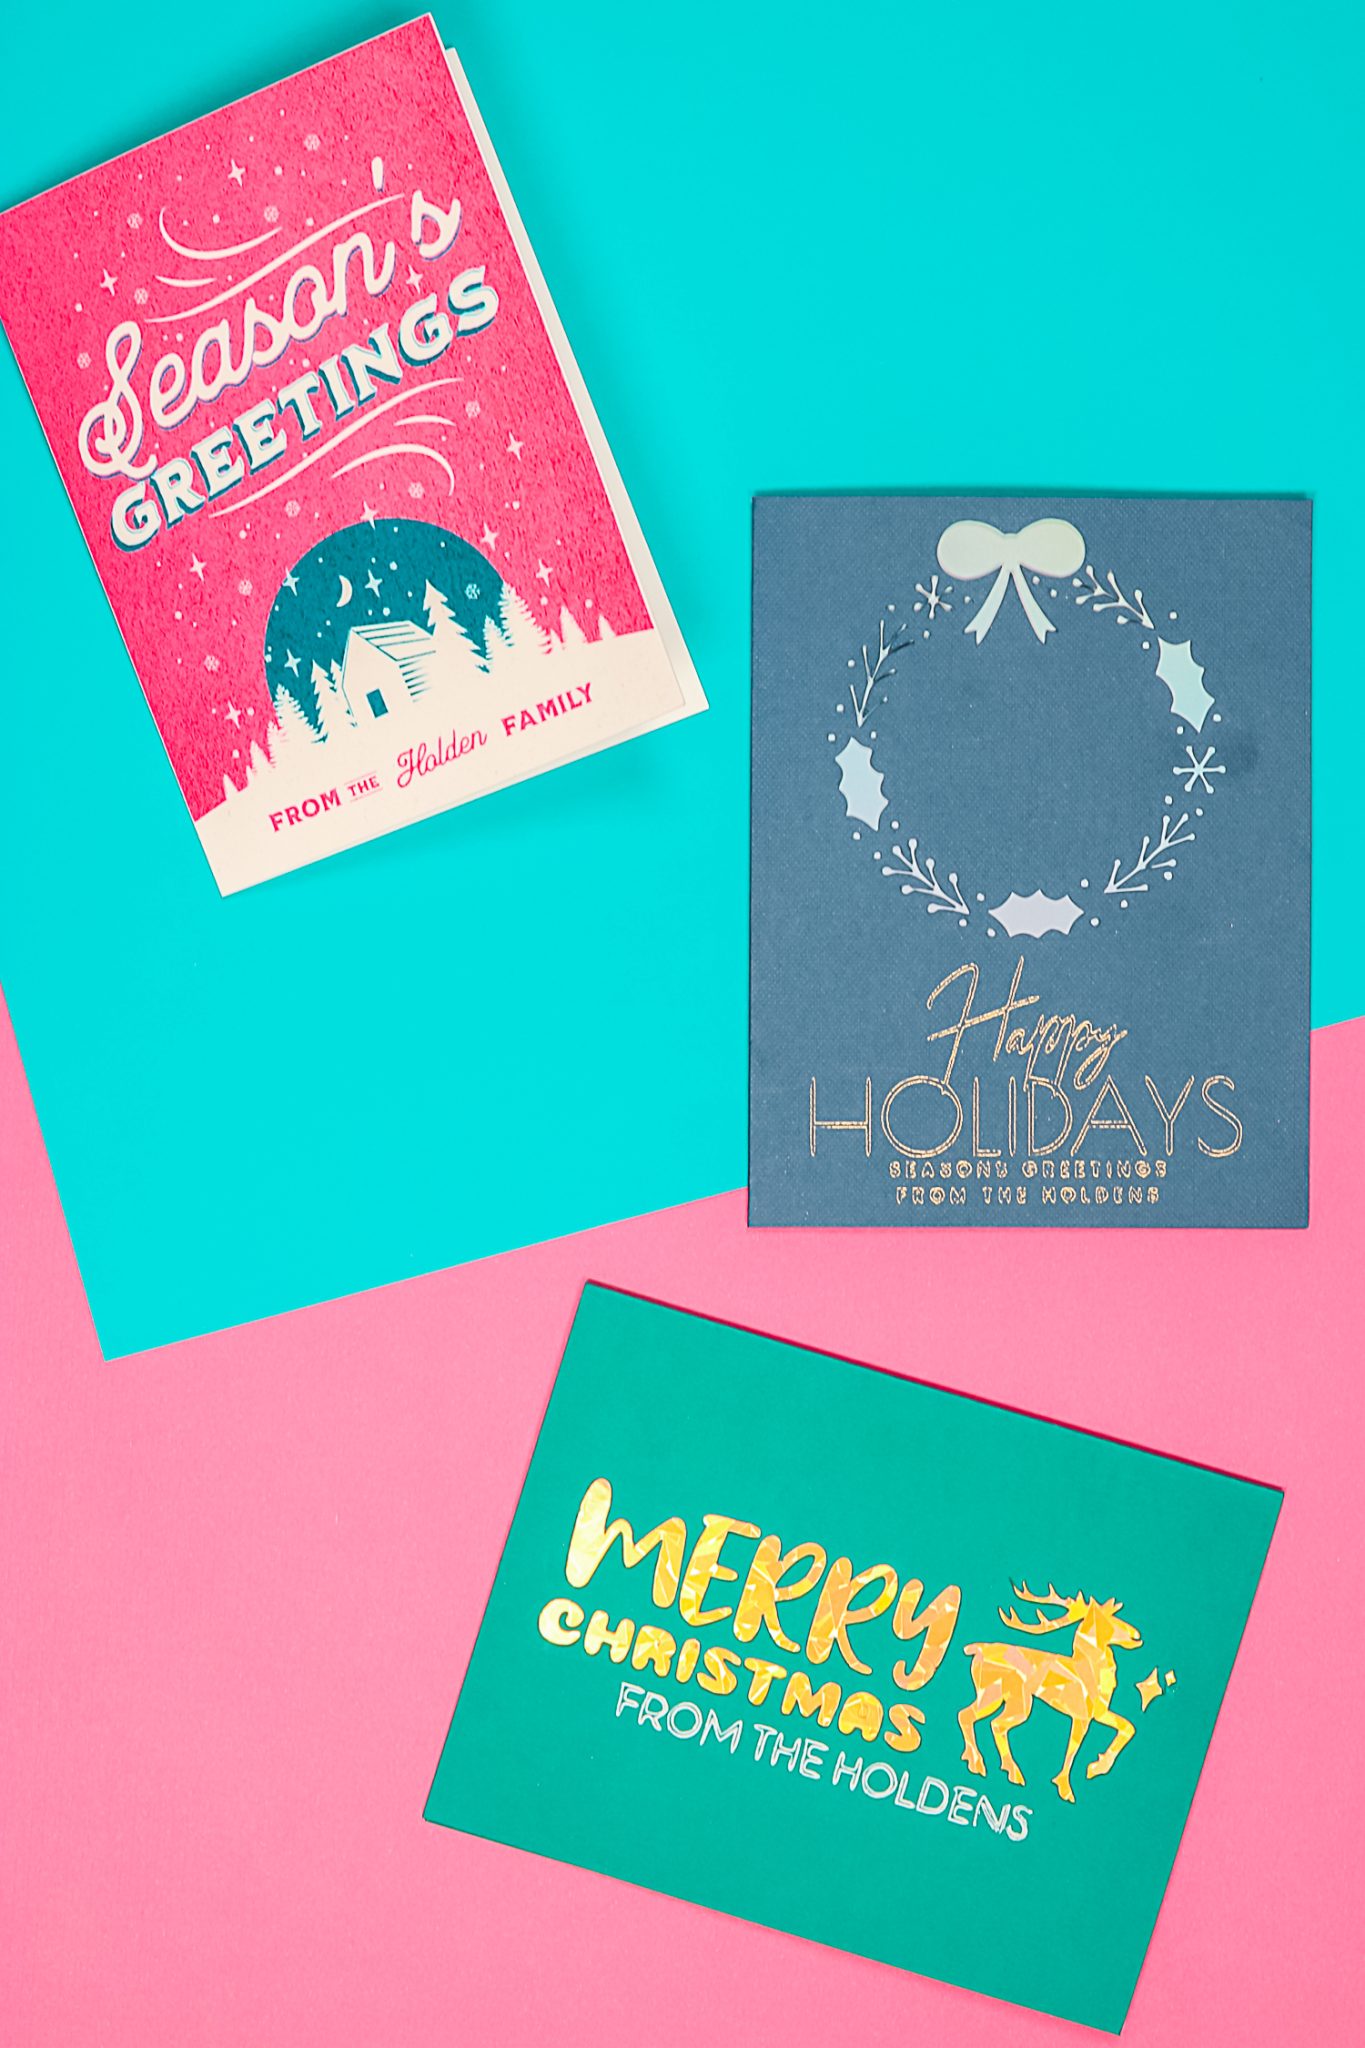 Cricut Christmas cards with kittl completed cards.